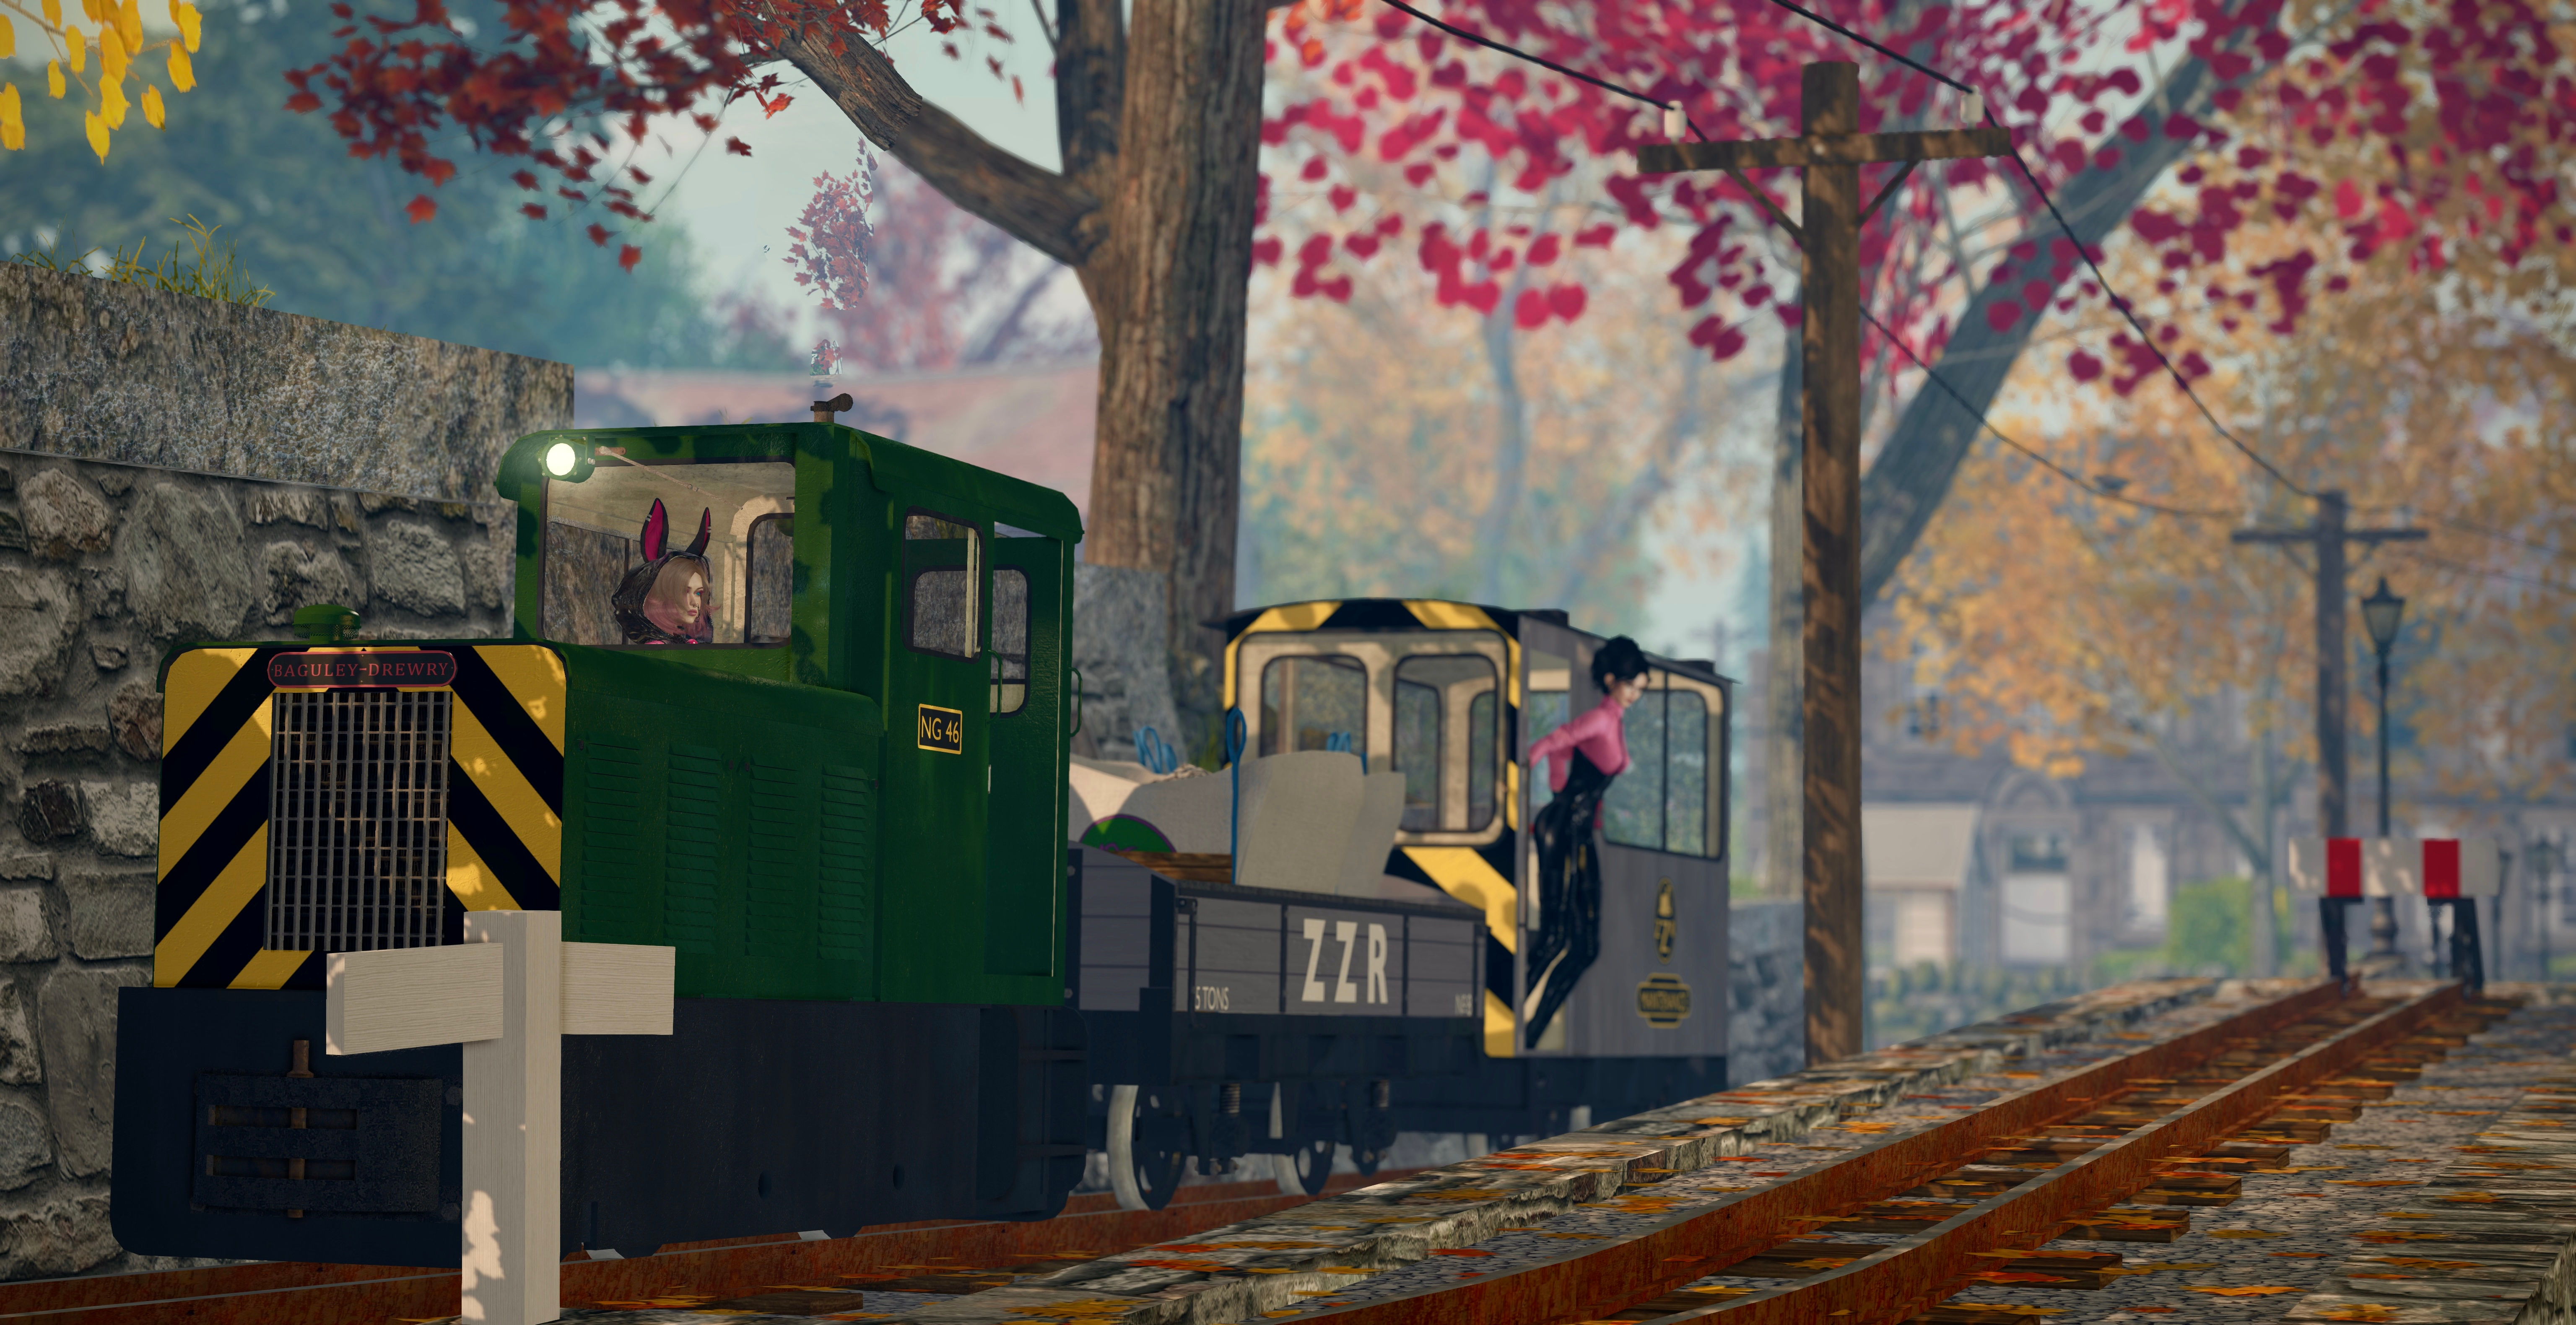 The Zany Zen Railway P-way train working its way up Seogyeo Hill, with The Zany Zen driving and Alexis Sinclair leaning out of the brakevan.